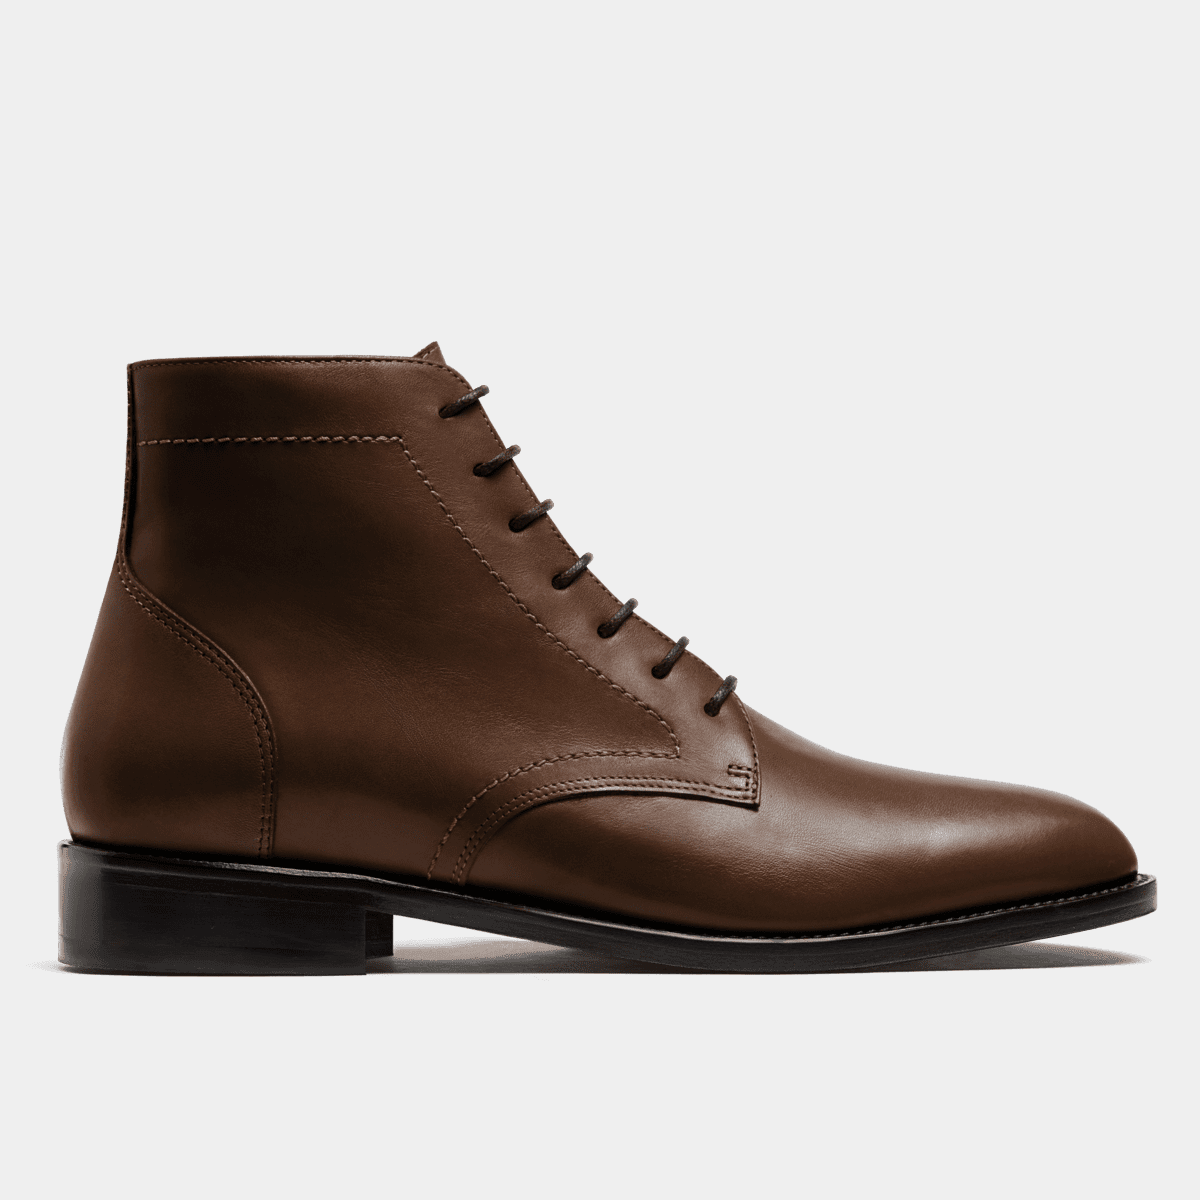 Boots - brown italian calf leather